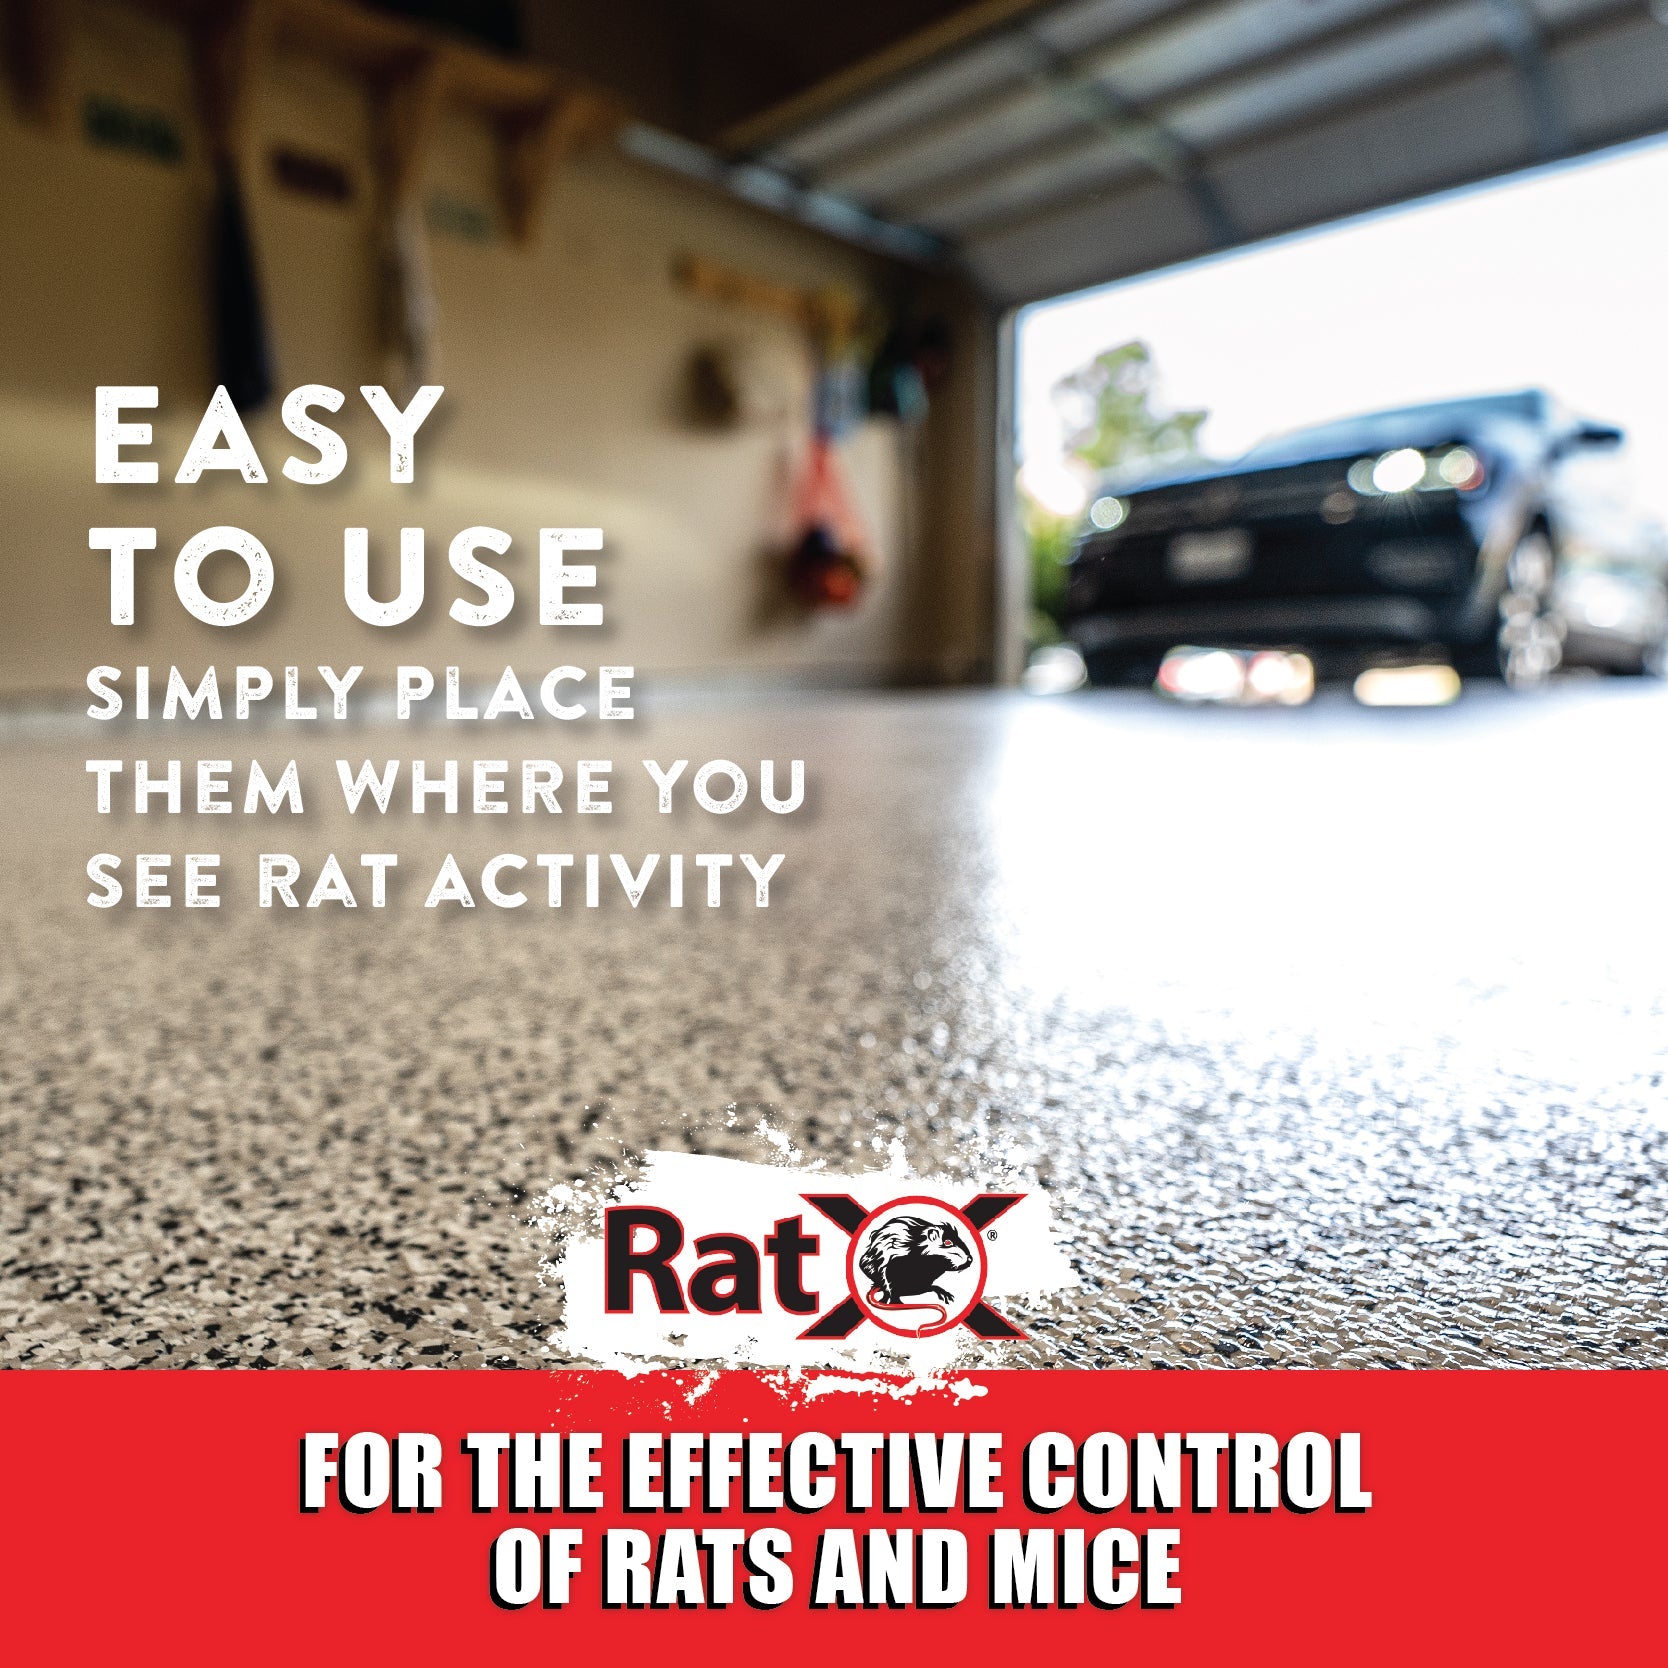 EcoClear RatX® Rat and Mouse Attractant - Oley, PA - Oley Valley Feed